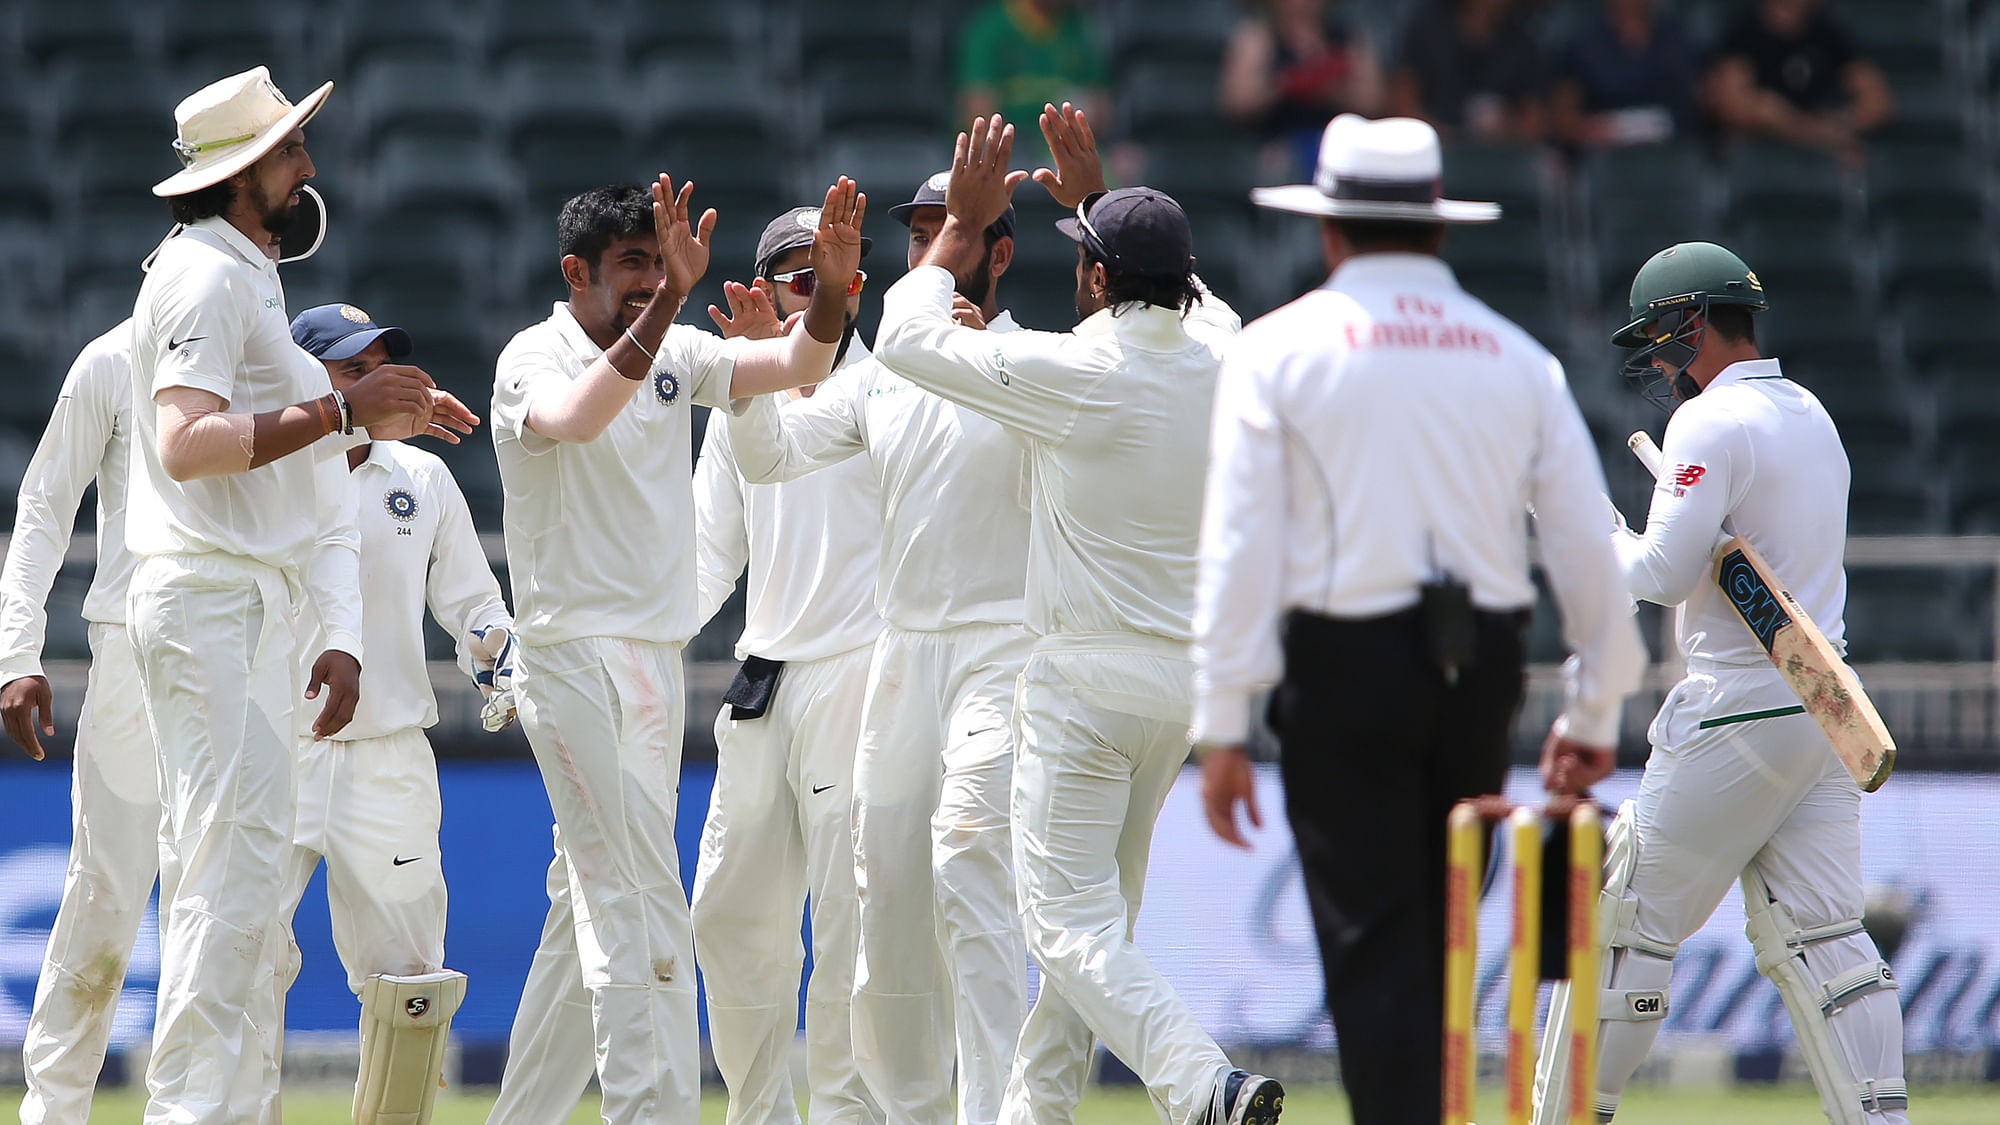 Playing only his 3rd Test match, Jasprit Bumrah collected his maiden 5-wicket haul in the format.